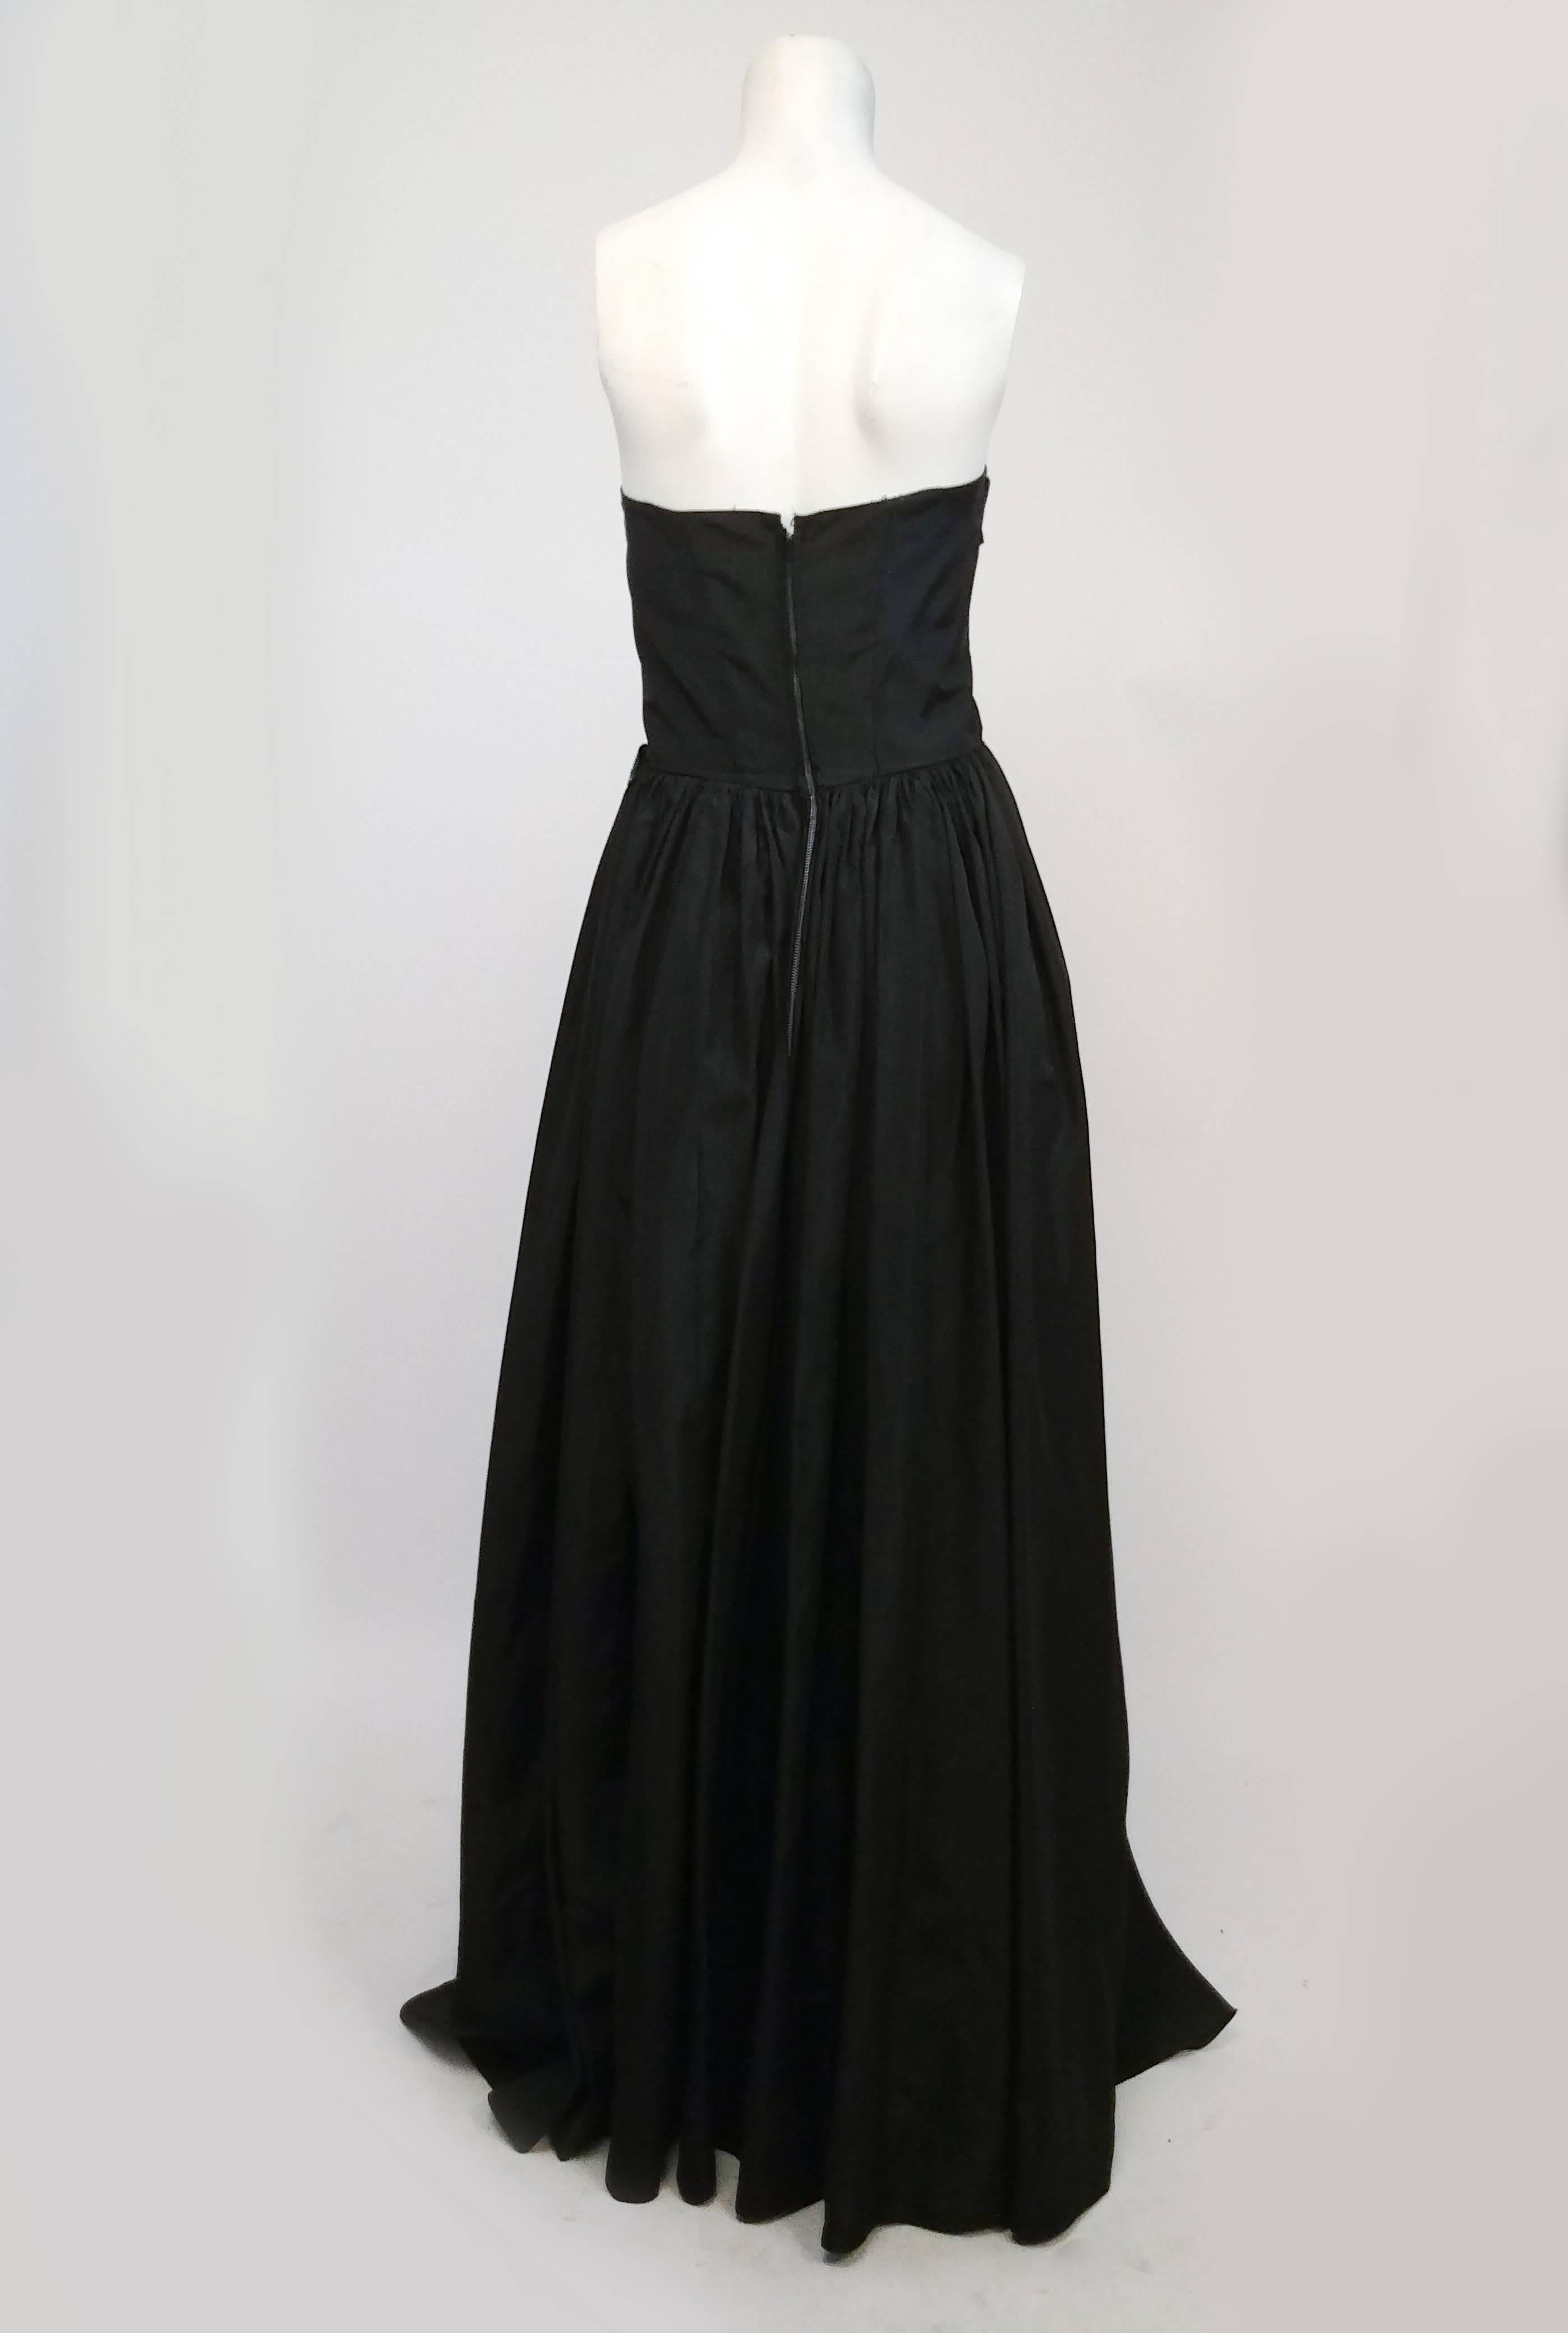 Women's Black Ruched Front Rose Embellishment Gown, 1950s  For Sale